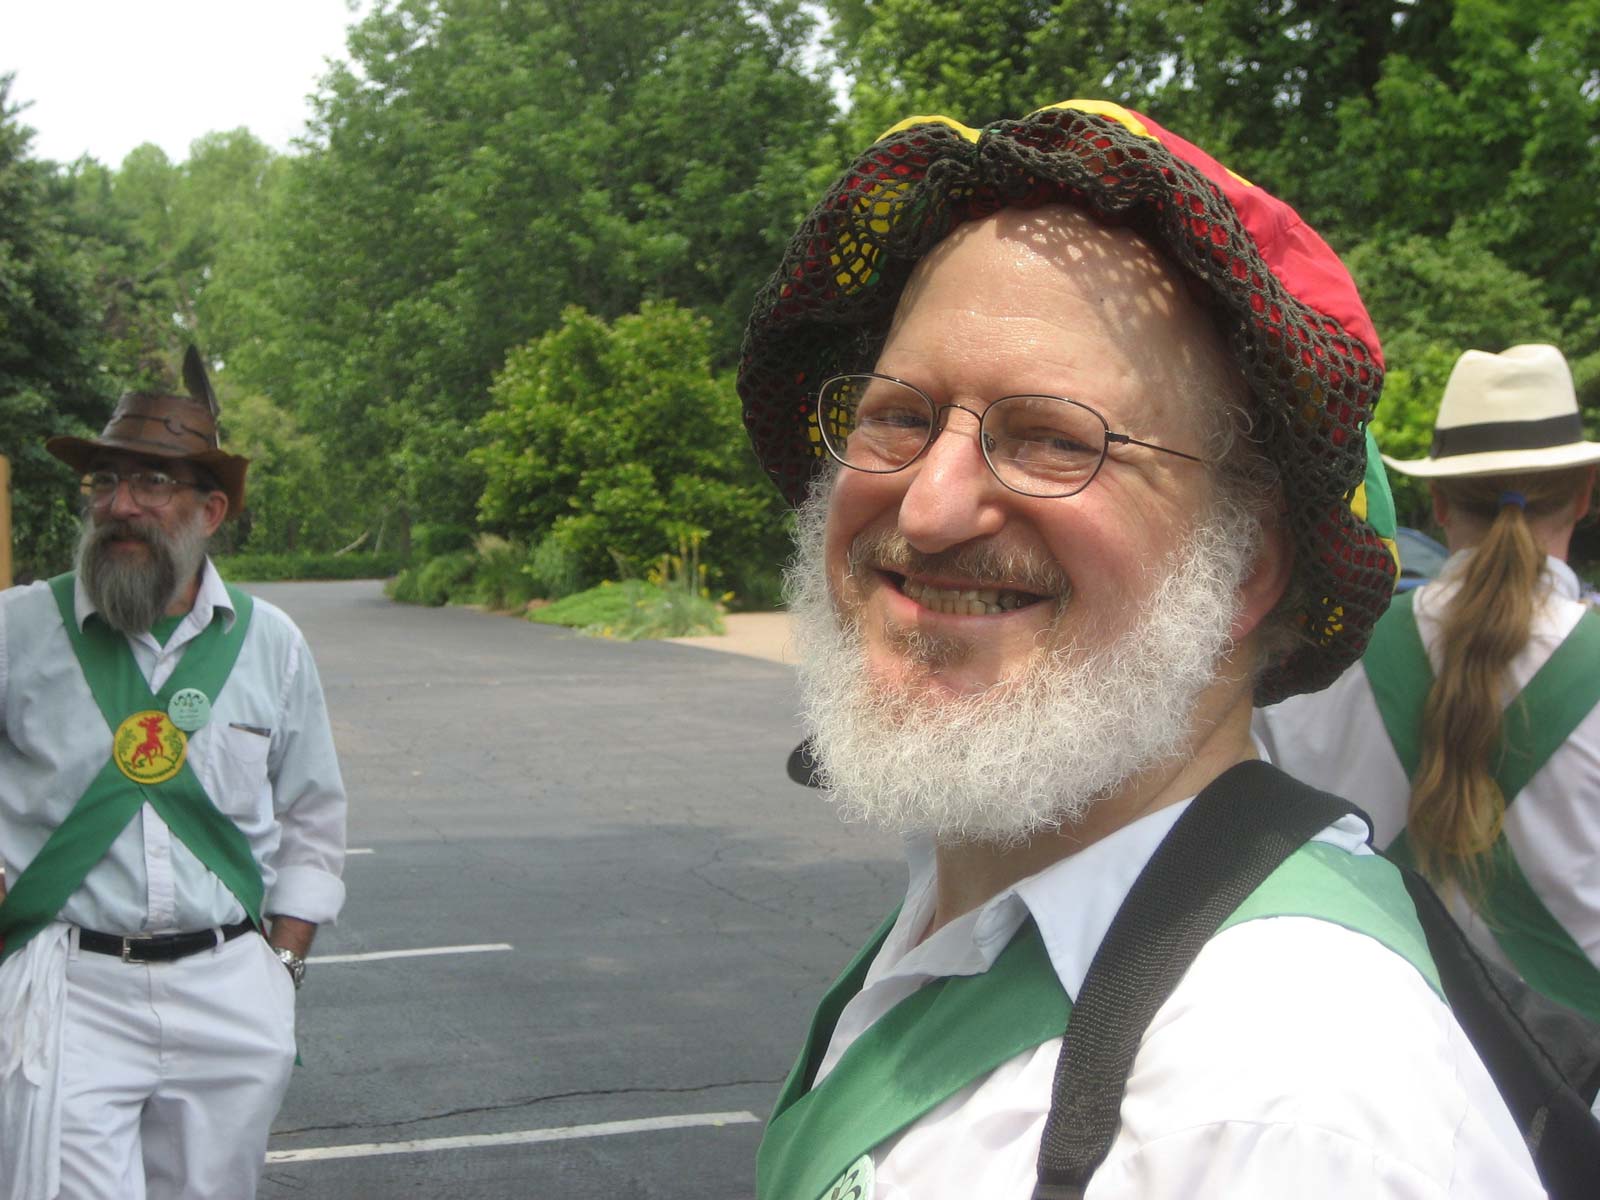 Ed Stern, wearing morris dance clothing and smiling